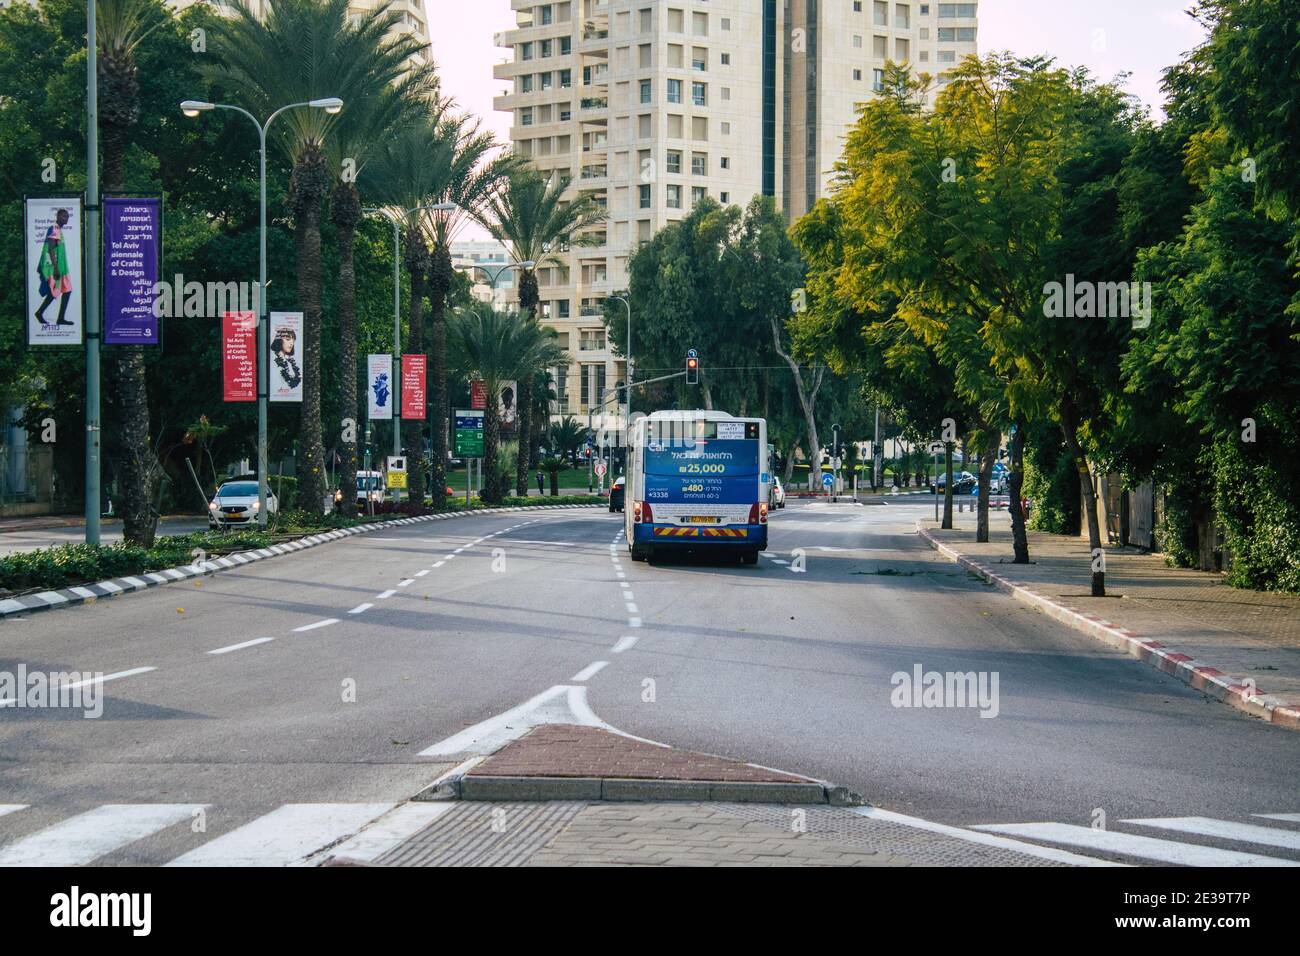 Tel Aviv Israel January 17 21 View Of An Israeli Public Bus Driving Through The Streets Of Tel Aviv During The Lockdown And Coronavirus Outbreak In Stock Photo Alamy